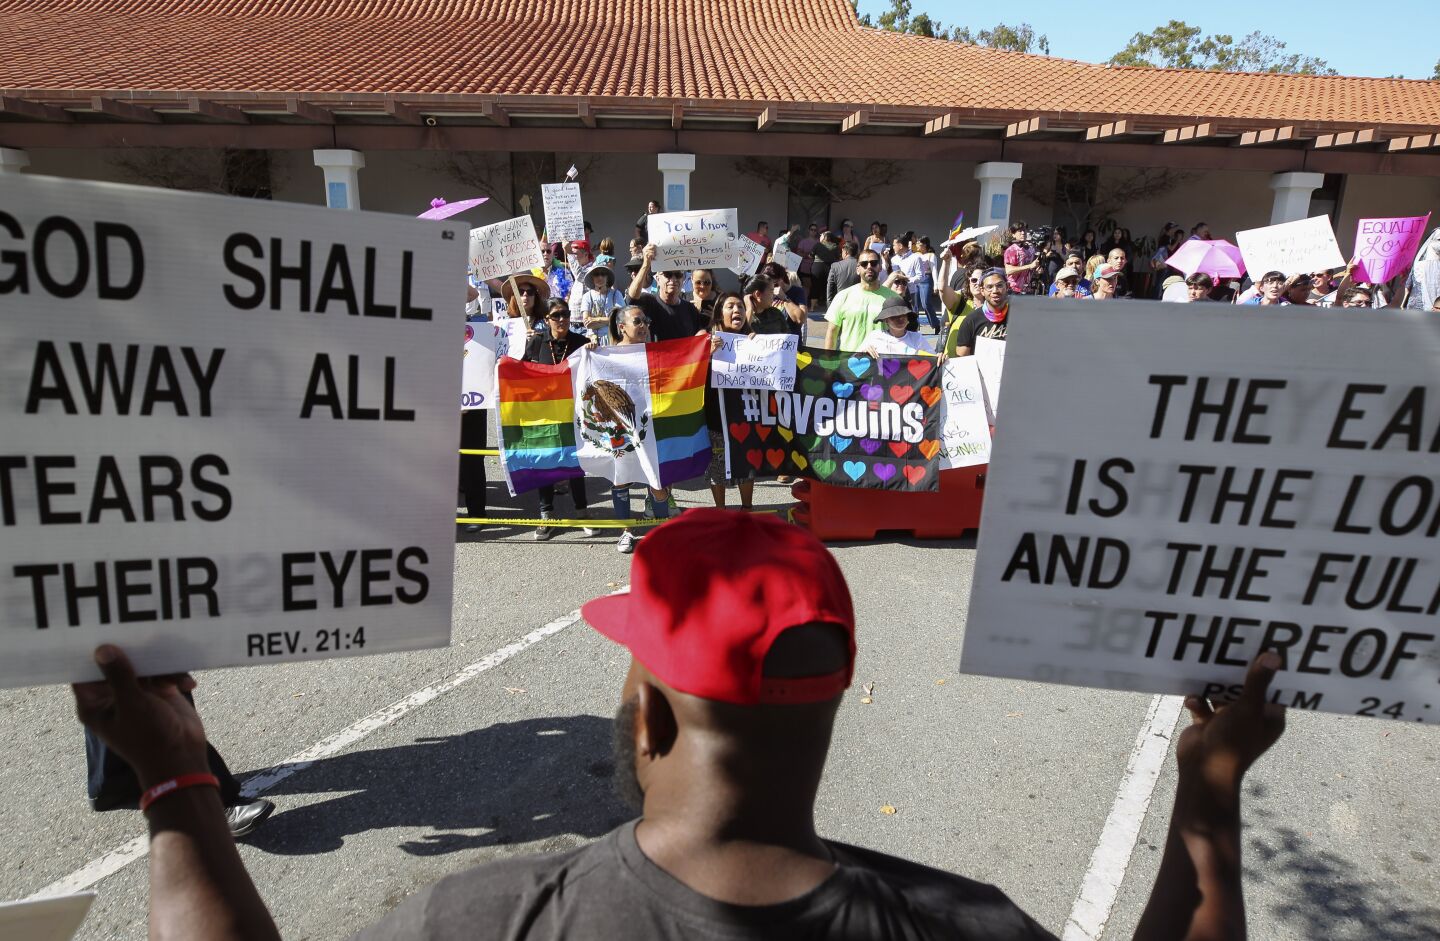 James Smith holds signs as he stands with protesters against the Drag Queen Story Hour while those in support of stories being read to children by drag queens chant slogans on the other side of a barrier at the Chula Vista Public Library Civic Center Branch on Tuesday, September 10, 2019 in Chula Vista, California.